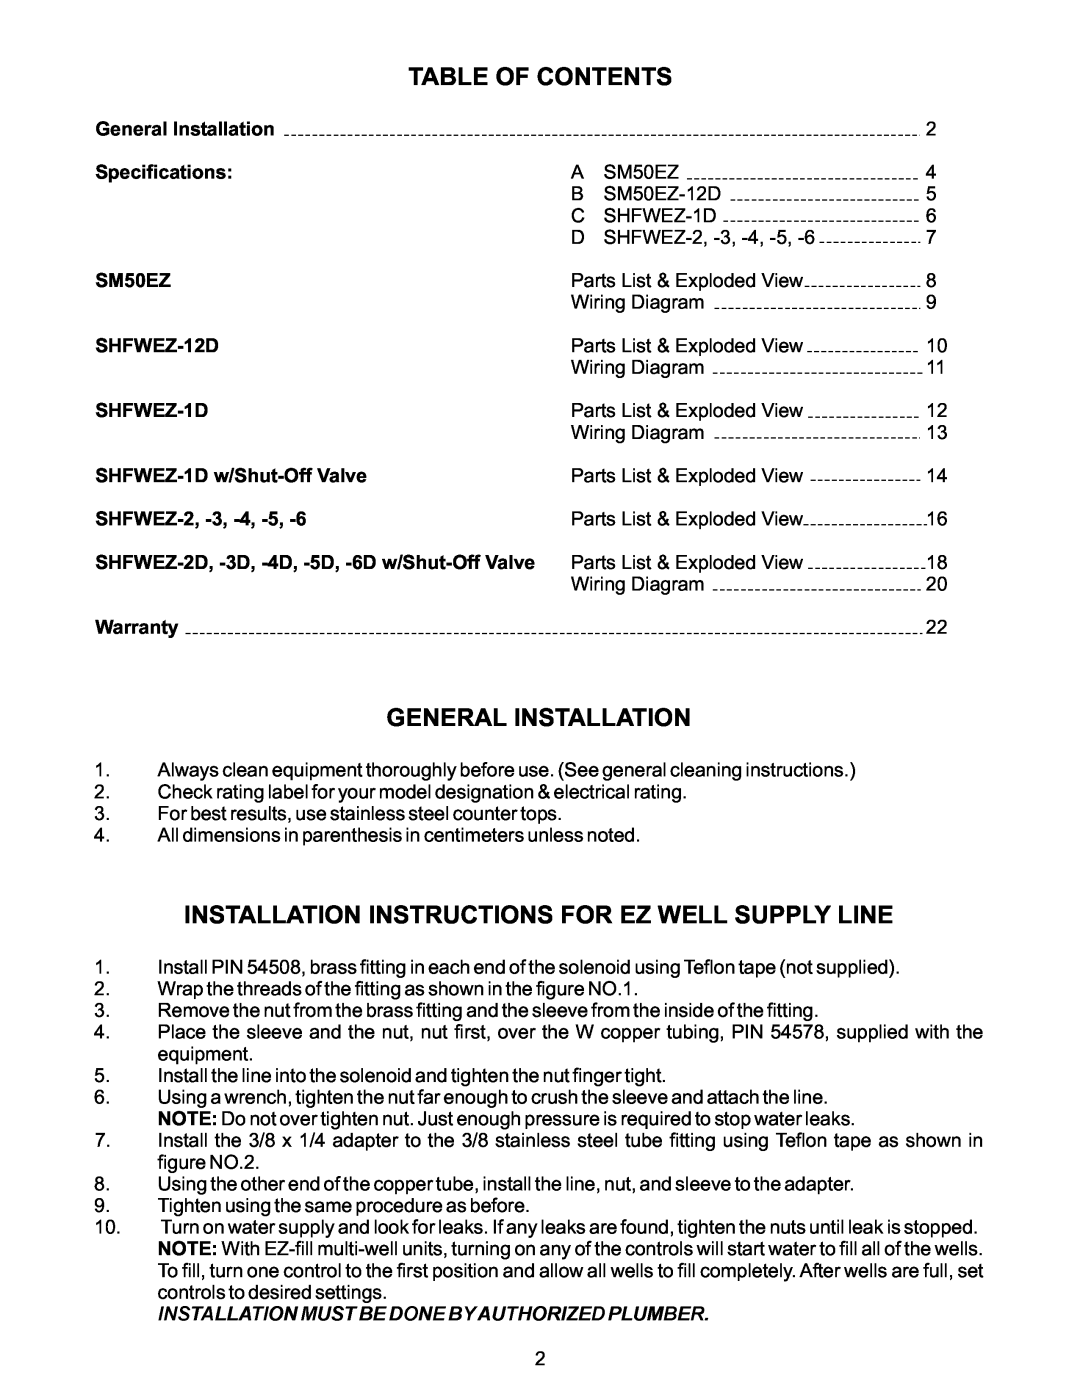 APW Wyott SHFWEZ-12D Table Of Contents, General Installation, Installationllation Instructions For Ez Well Supply Line 